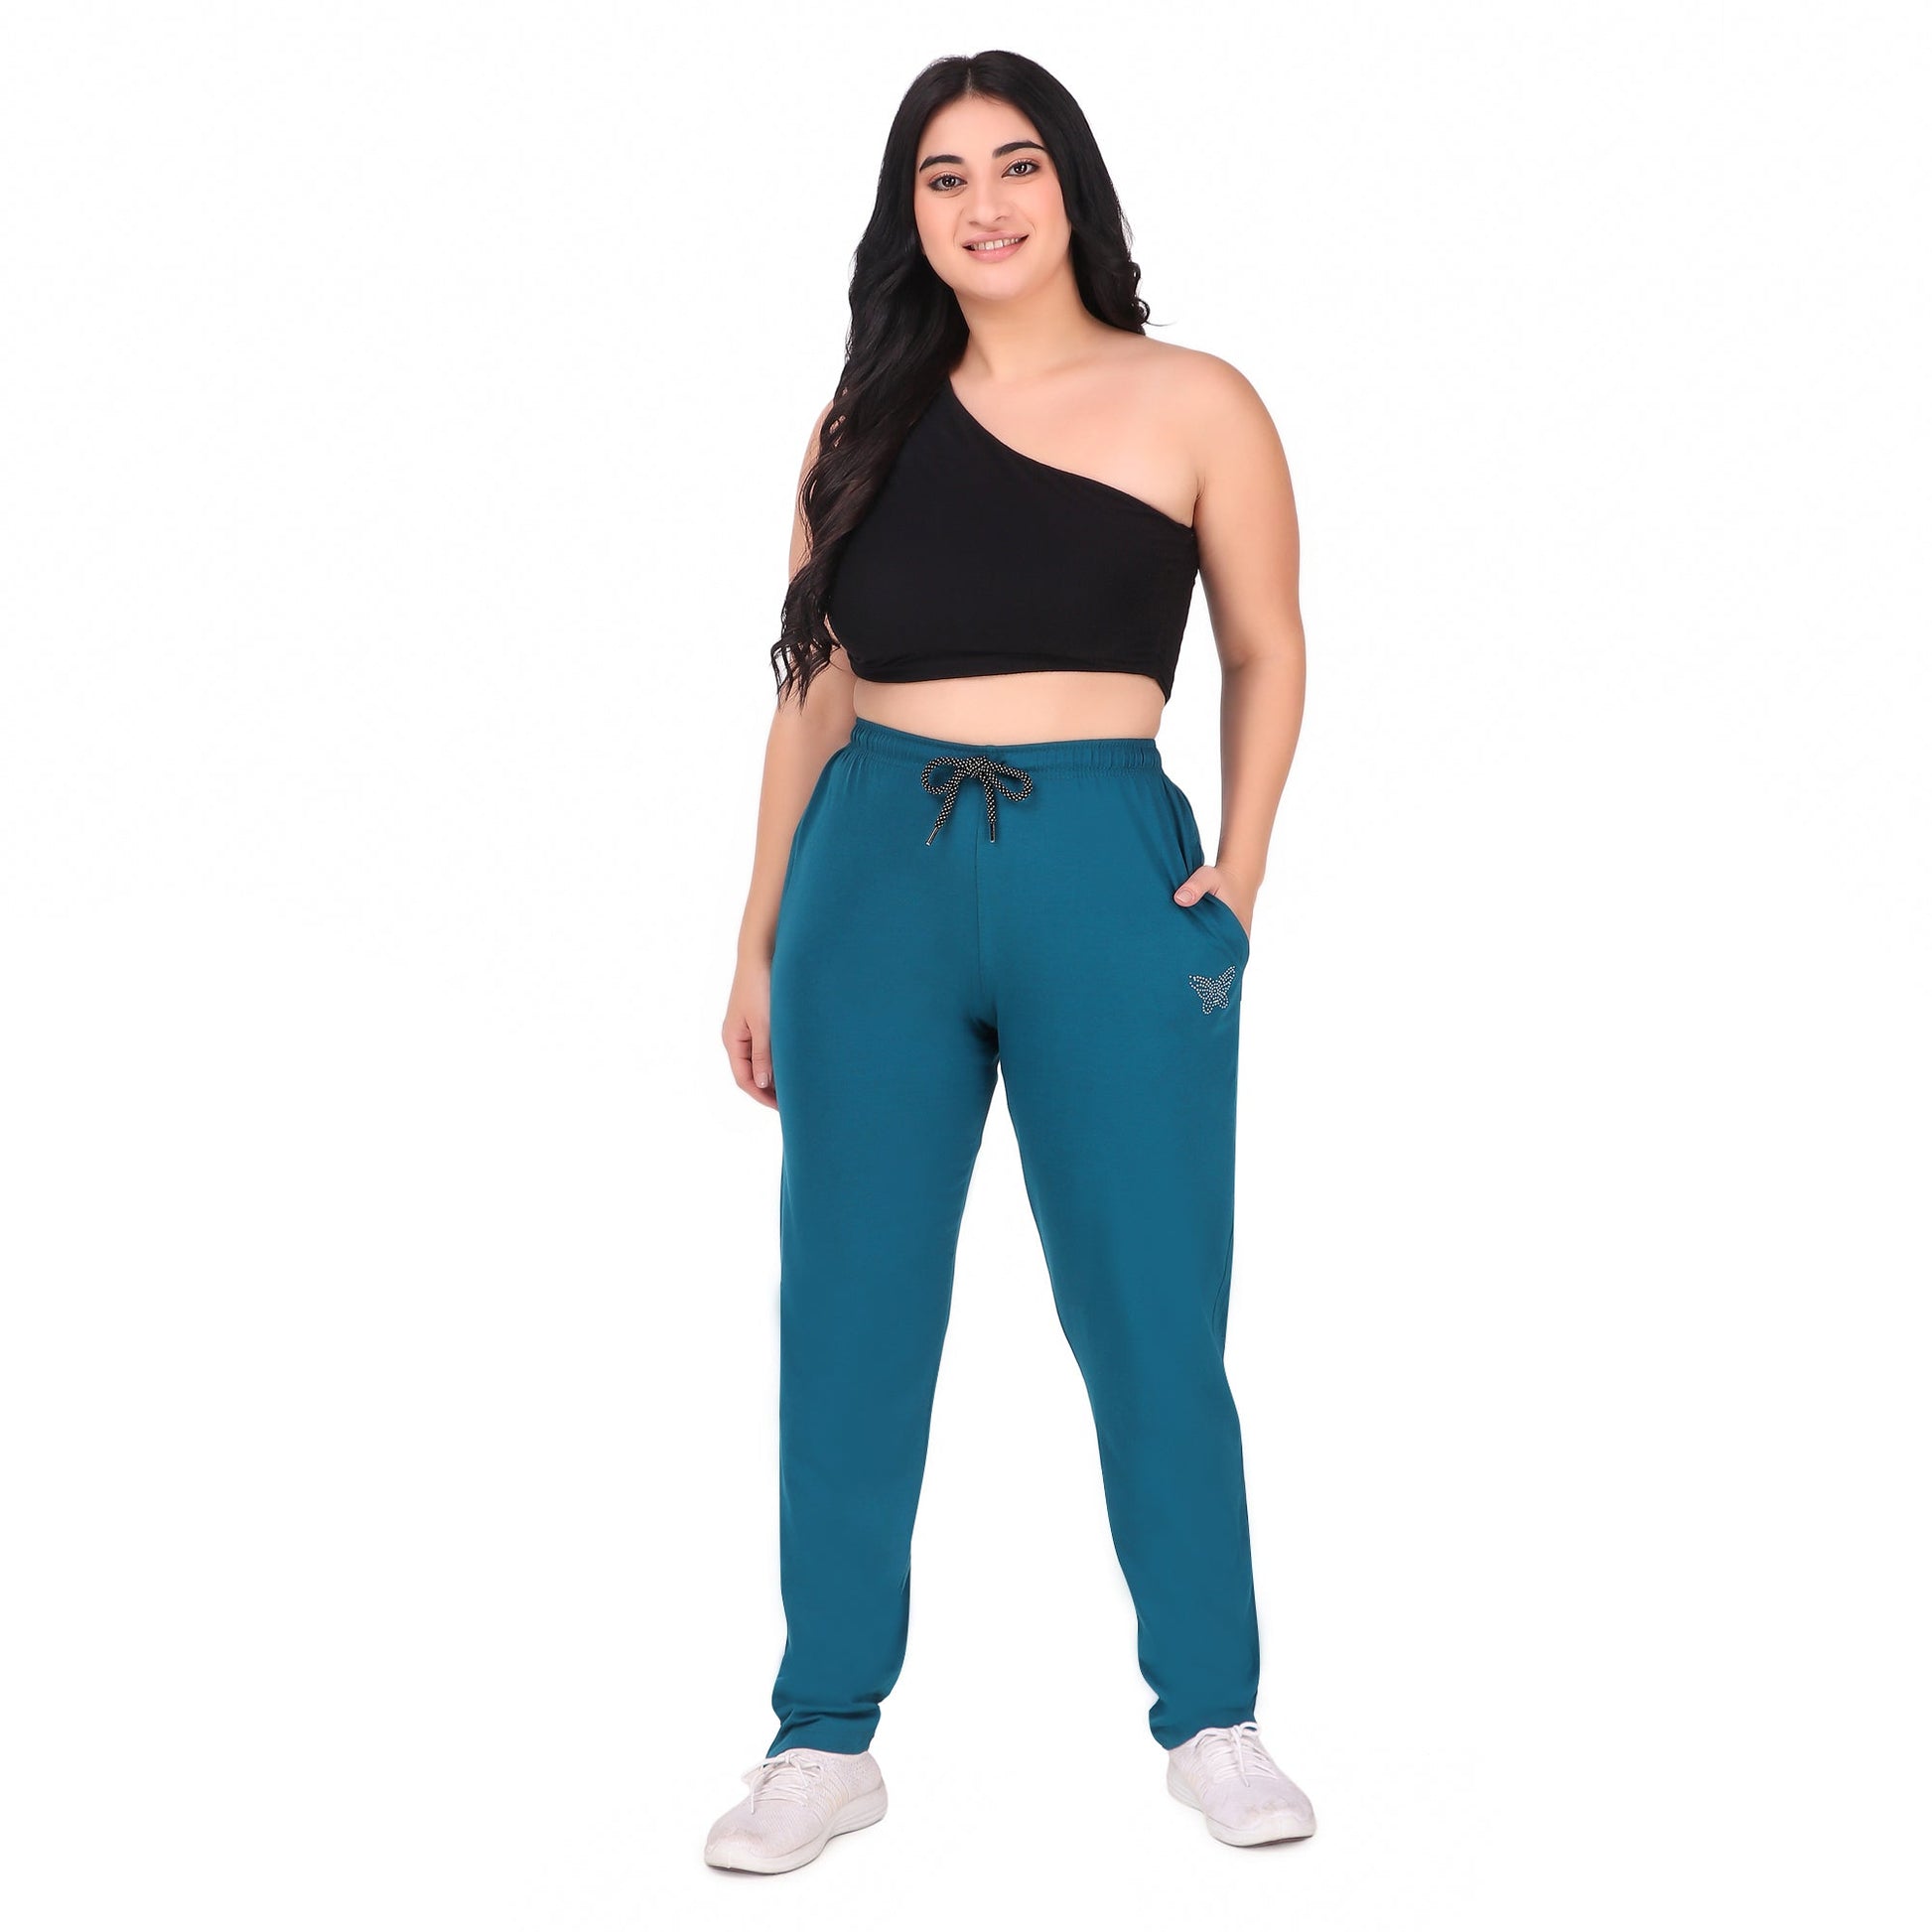 Buy Stylish Track pants for Women (Pack Of 2) online in India -  Cupidclothings – Cupid Clothings